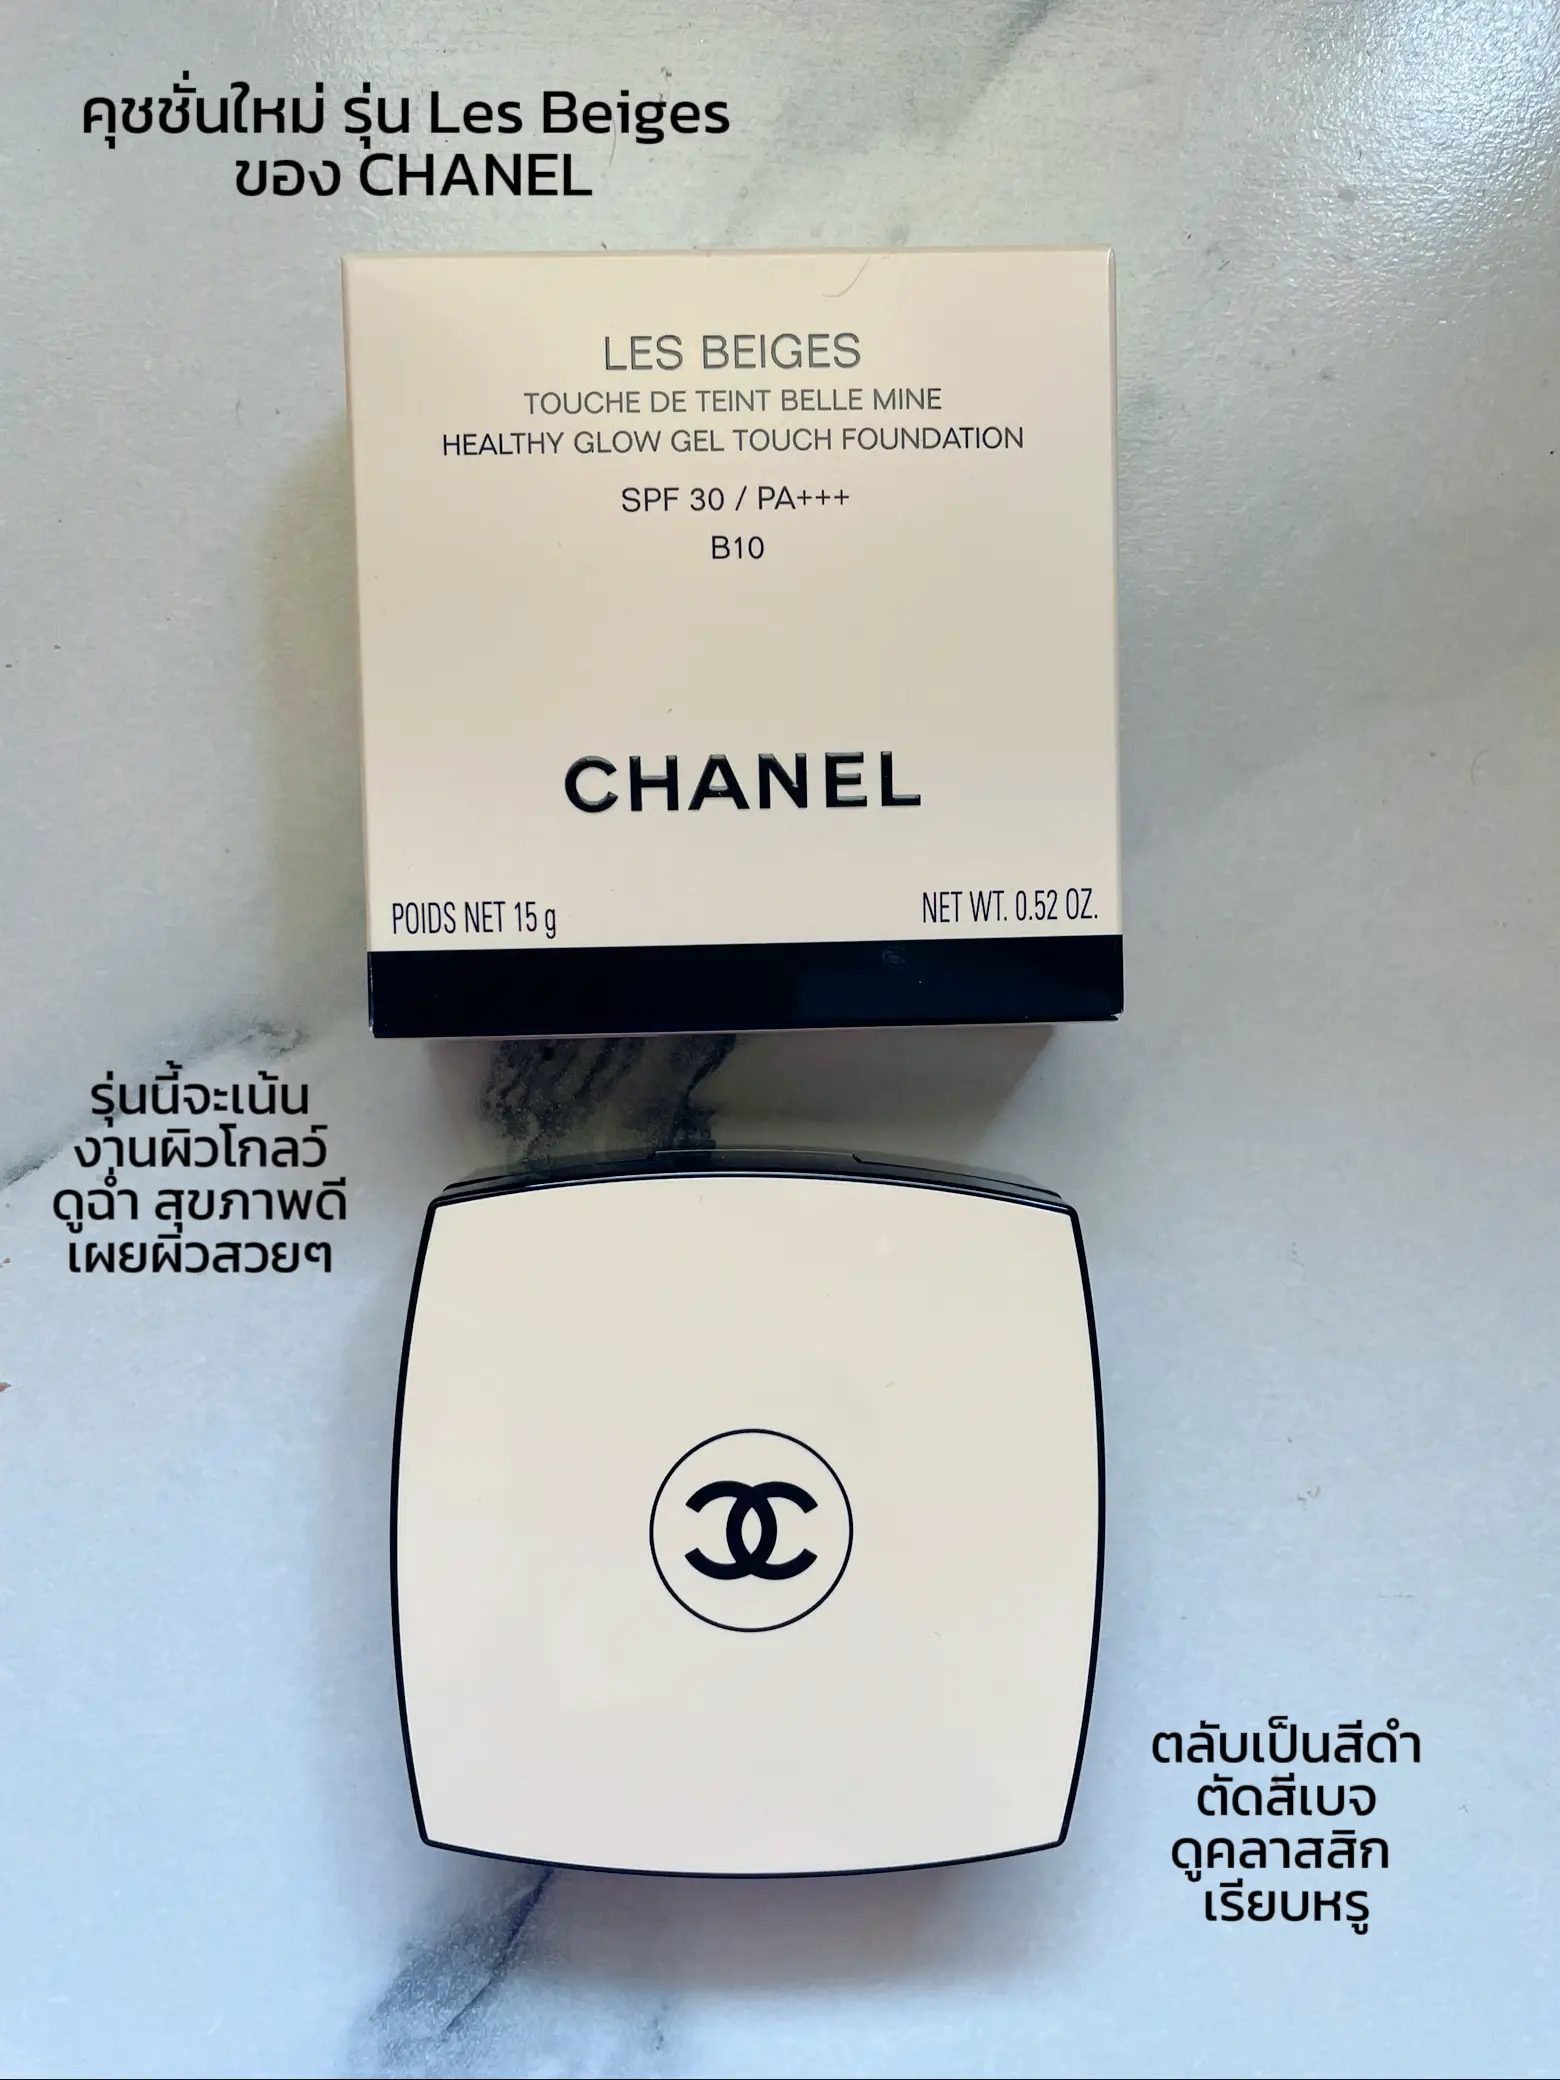 CHANEL Les Beiges Healthy Glow Gel Touch Foundation SPF 30/ PA+++ ~ B10